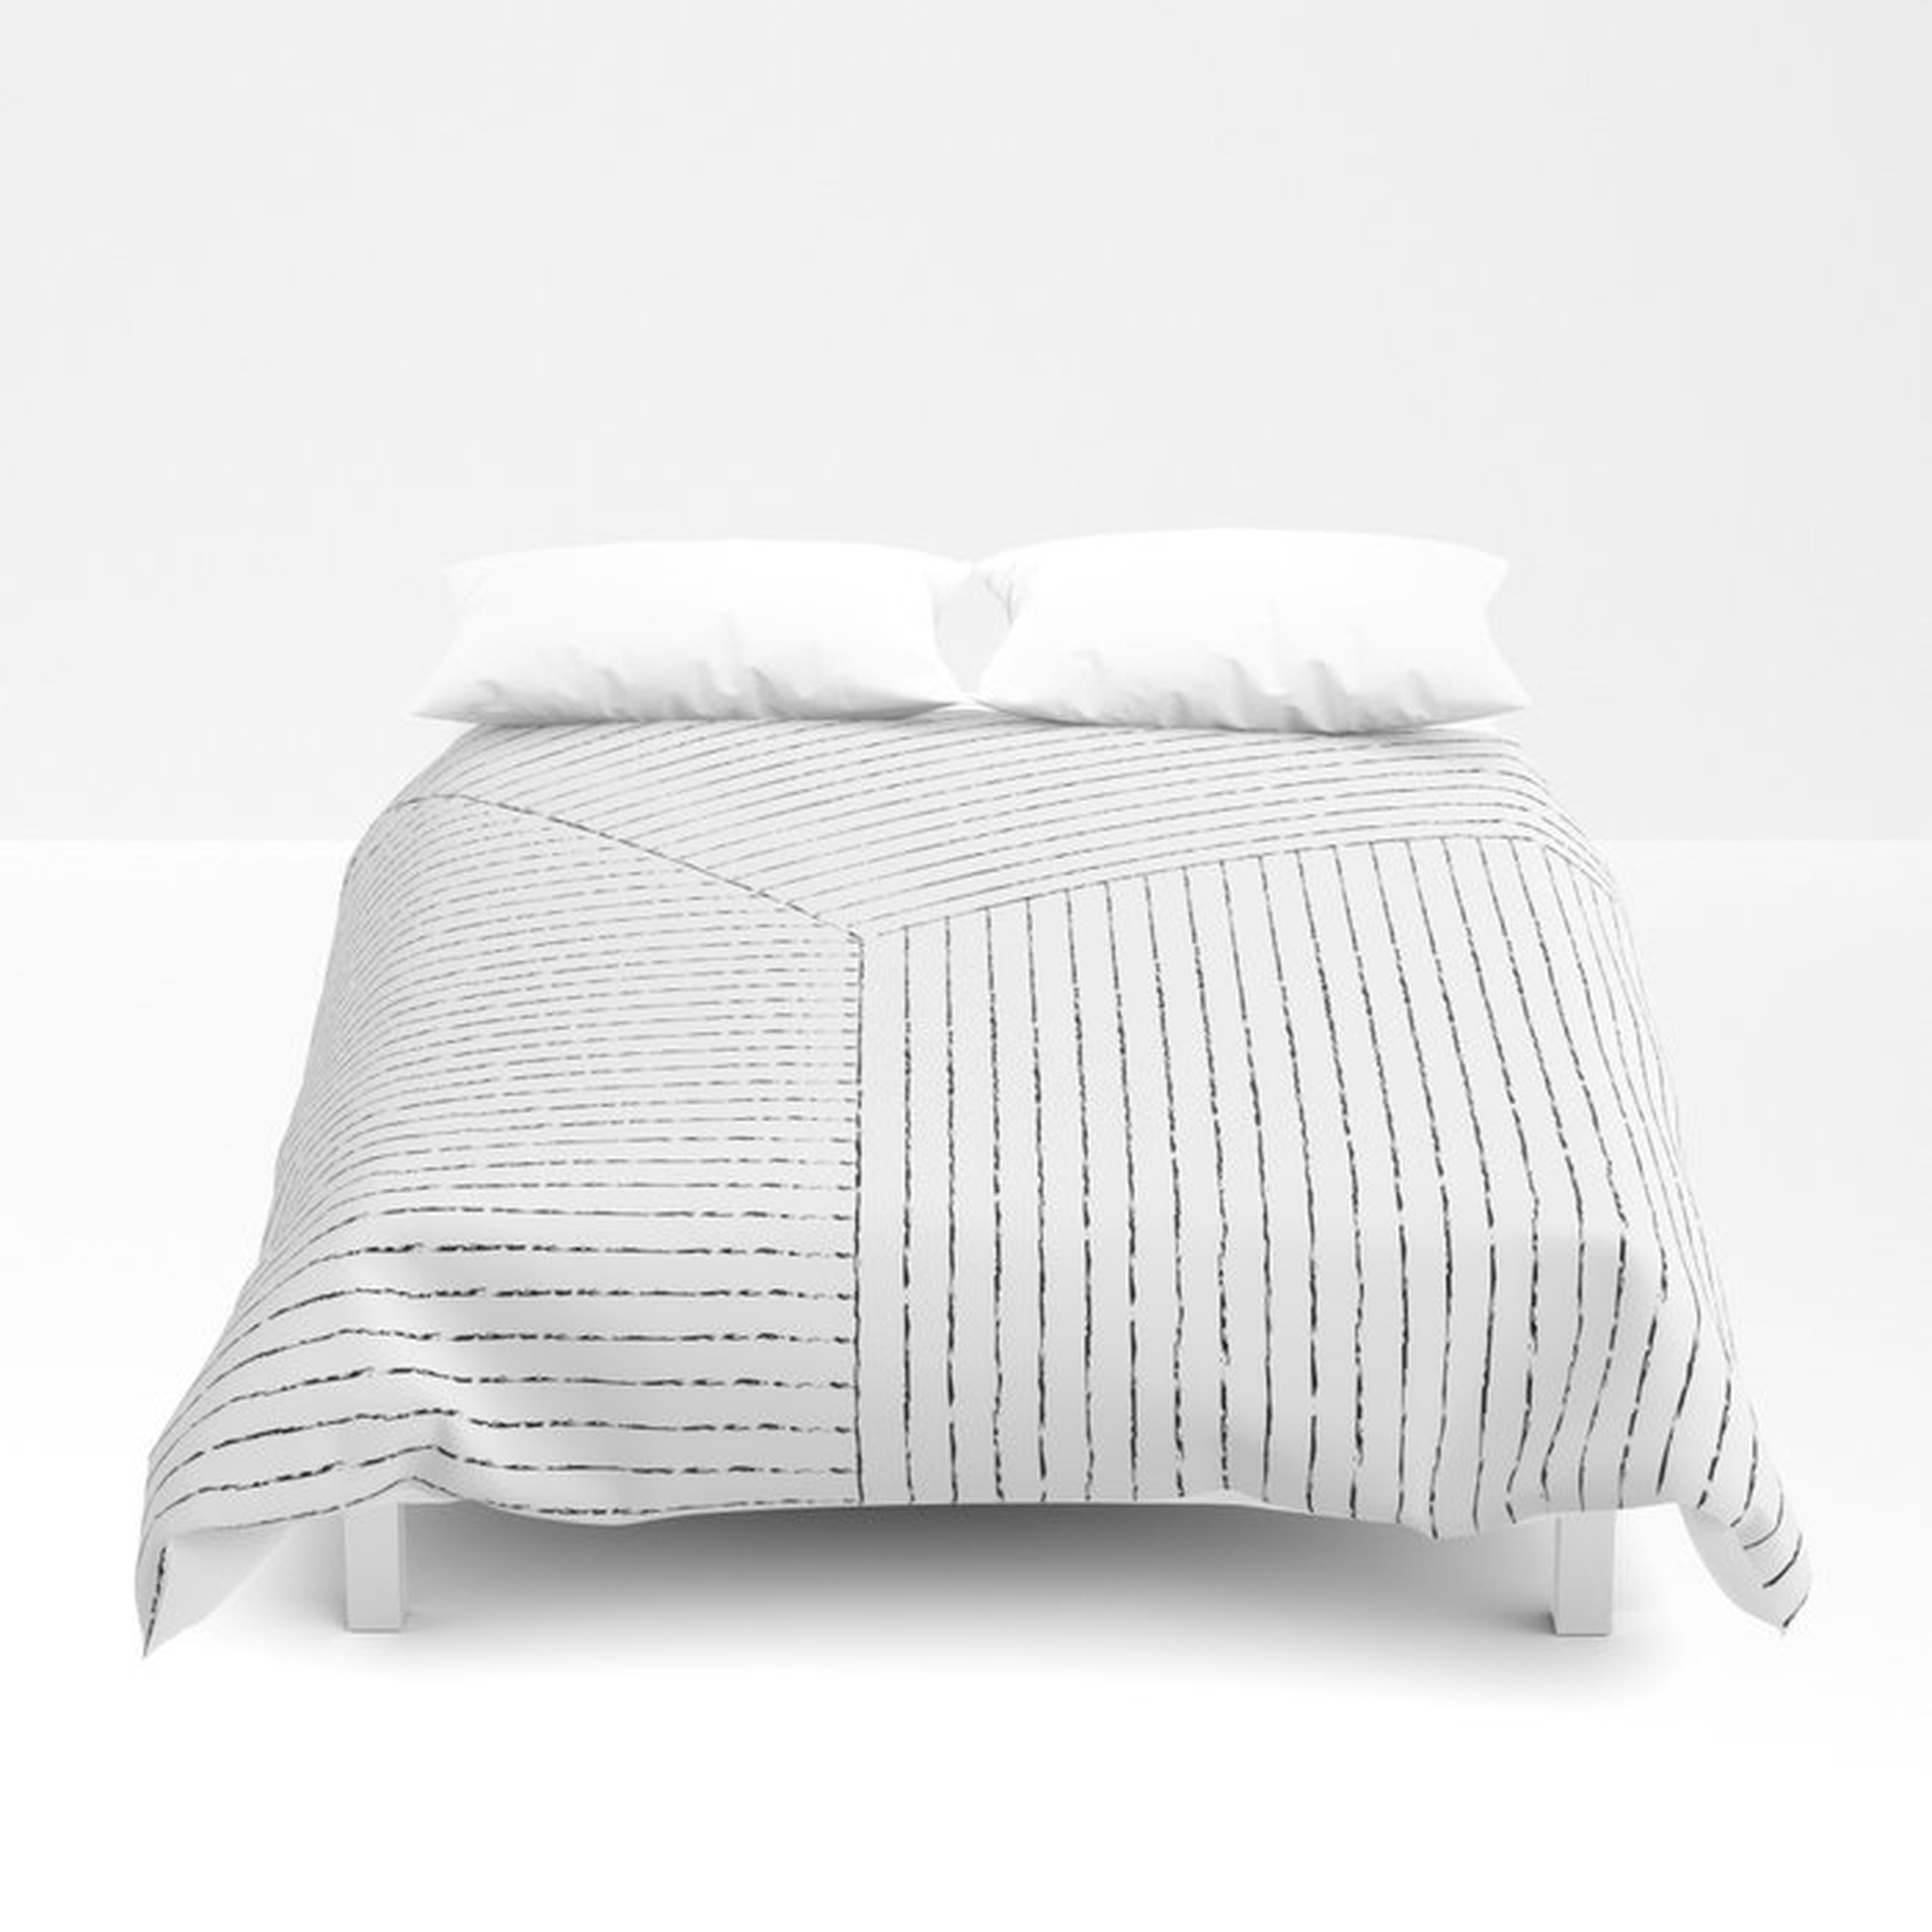 Lines Art Duvet Cover - Twin: 68" x 88" - Society6